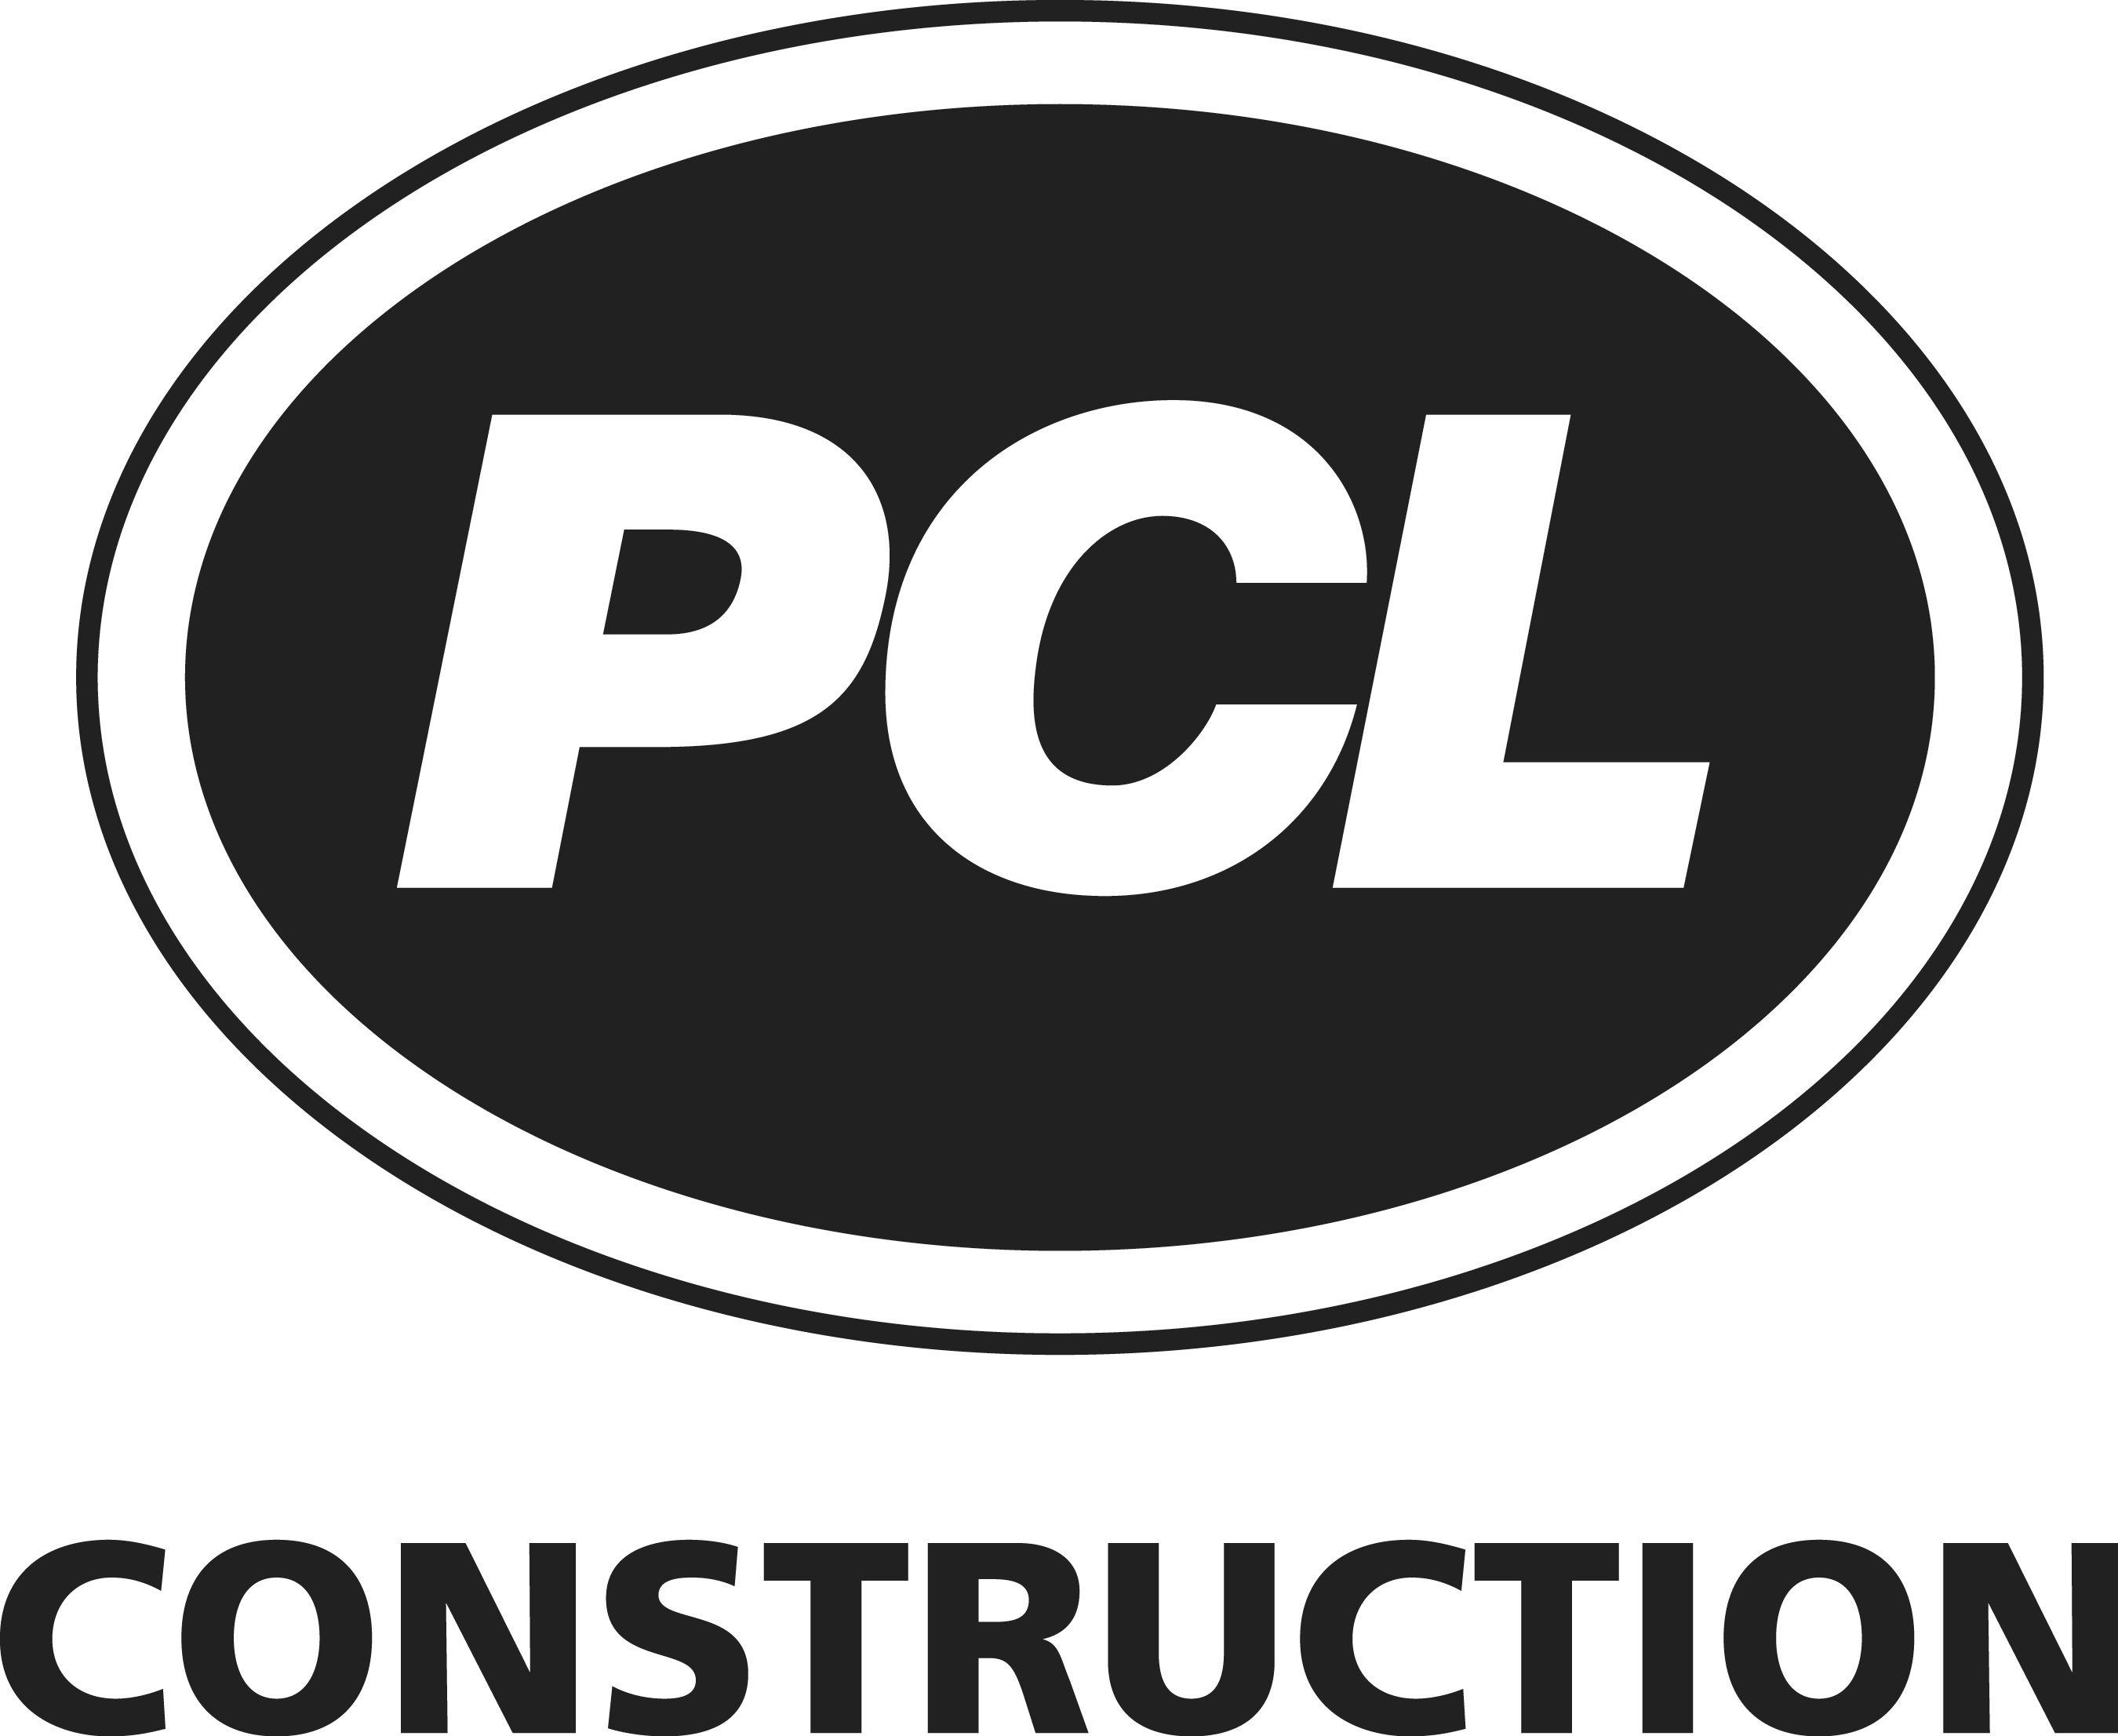 Black and White Construction Logo - PCL